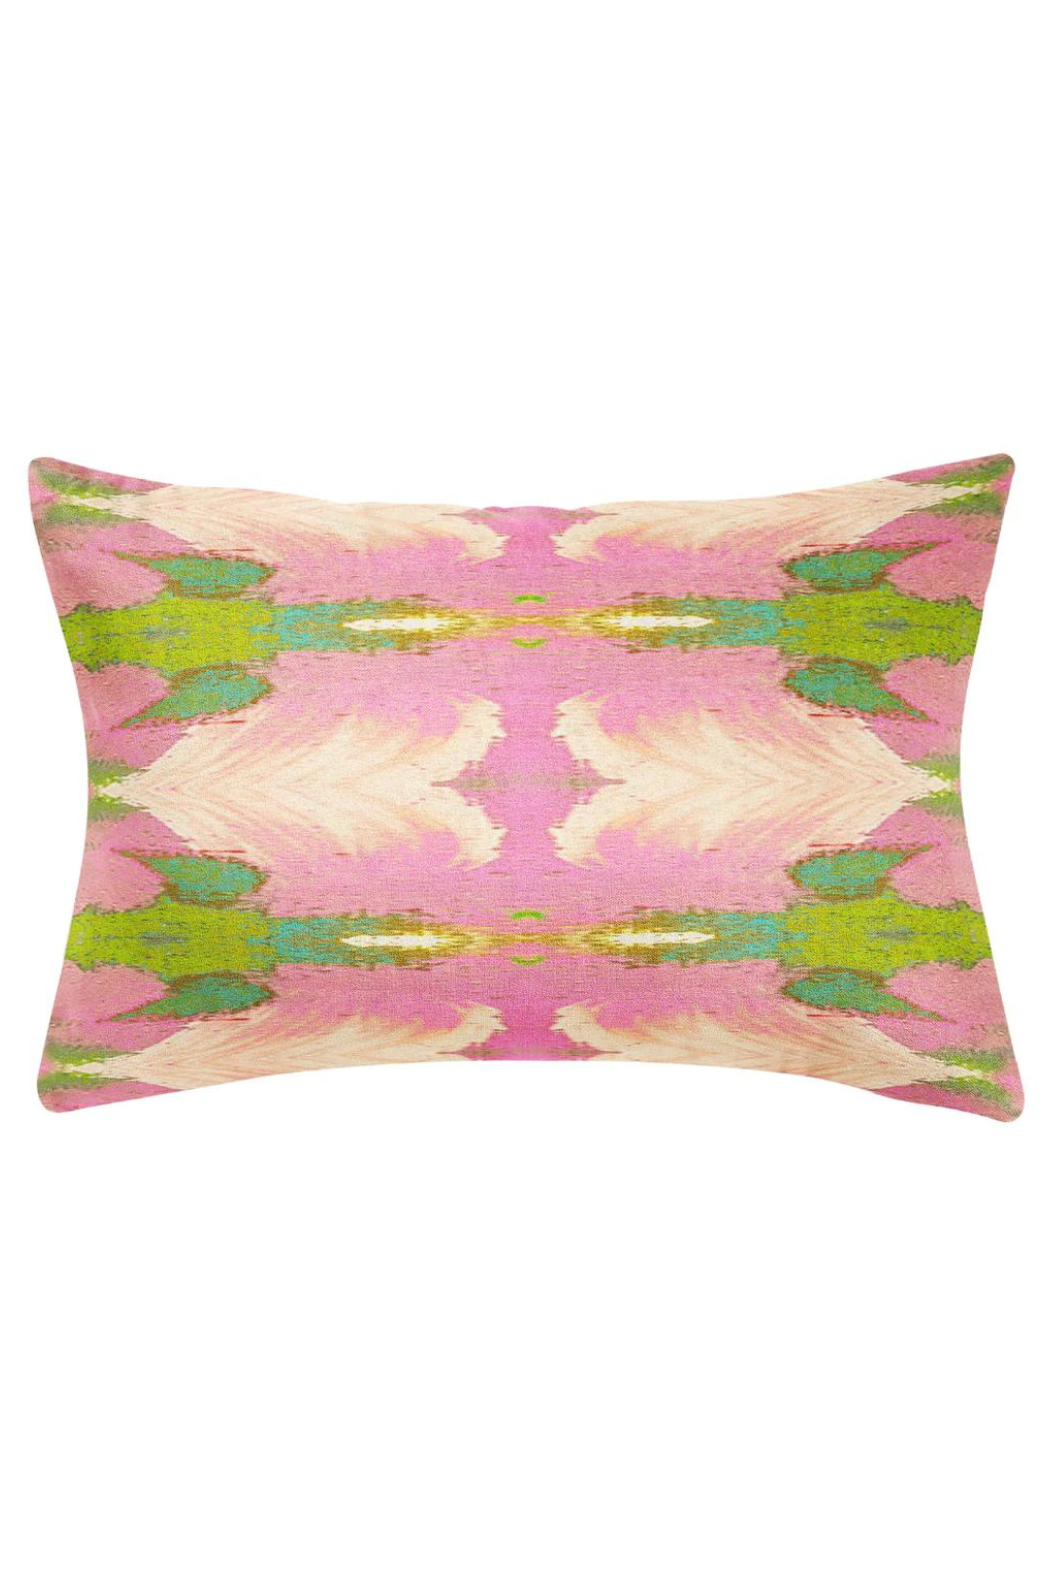 Downright Decorative Pillow Inserts 95/5, 12x12 Pillow